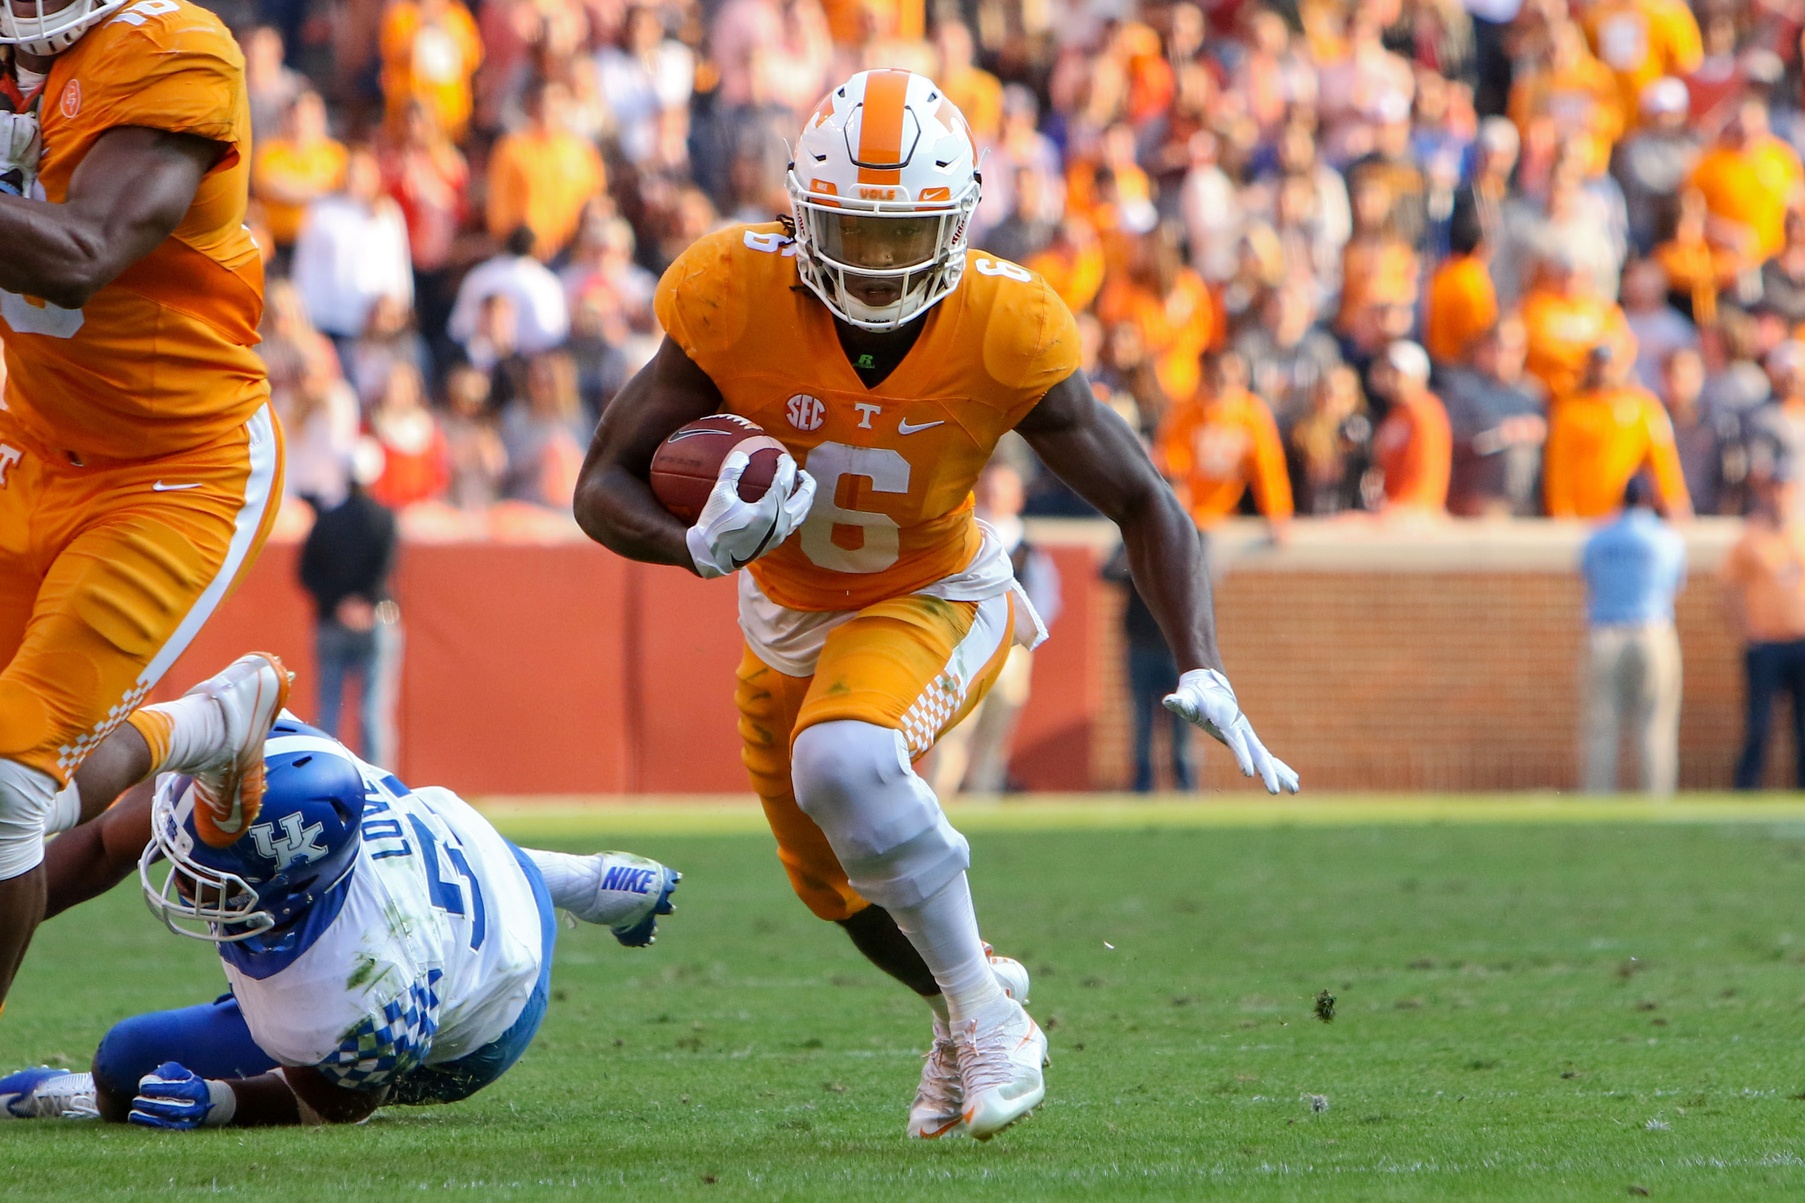 Nov 12, 2016; Knoxville, TN, USA; Tennessee Volunteers running back Alvin Kamara (6) runs for a touchdown against the Kentucky Wildcats during the fourth quarter at Neyland Stadium. Tennessee won 49 to 36. Mandatory Credit: Randy Sartin-USA TODAY Sports